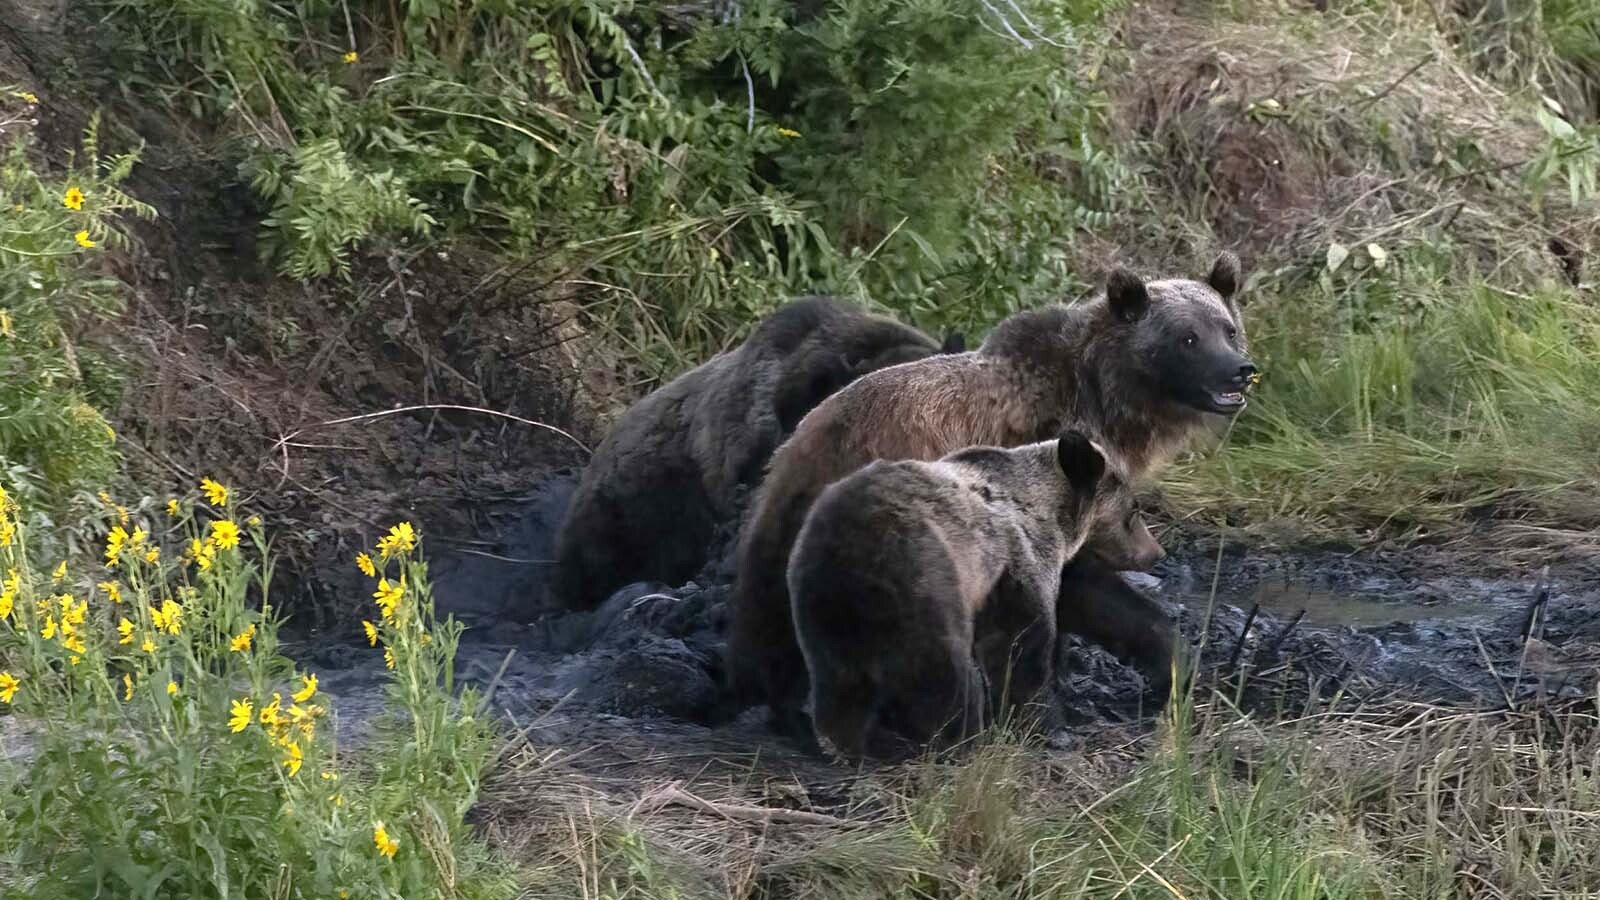 Outdoors and wildlife photographer Dave Bell of Pinedale took these photos of three grizzly bears gorging on a cattle carcass along the Chief Joseph Highway north of Cody.